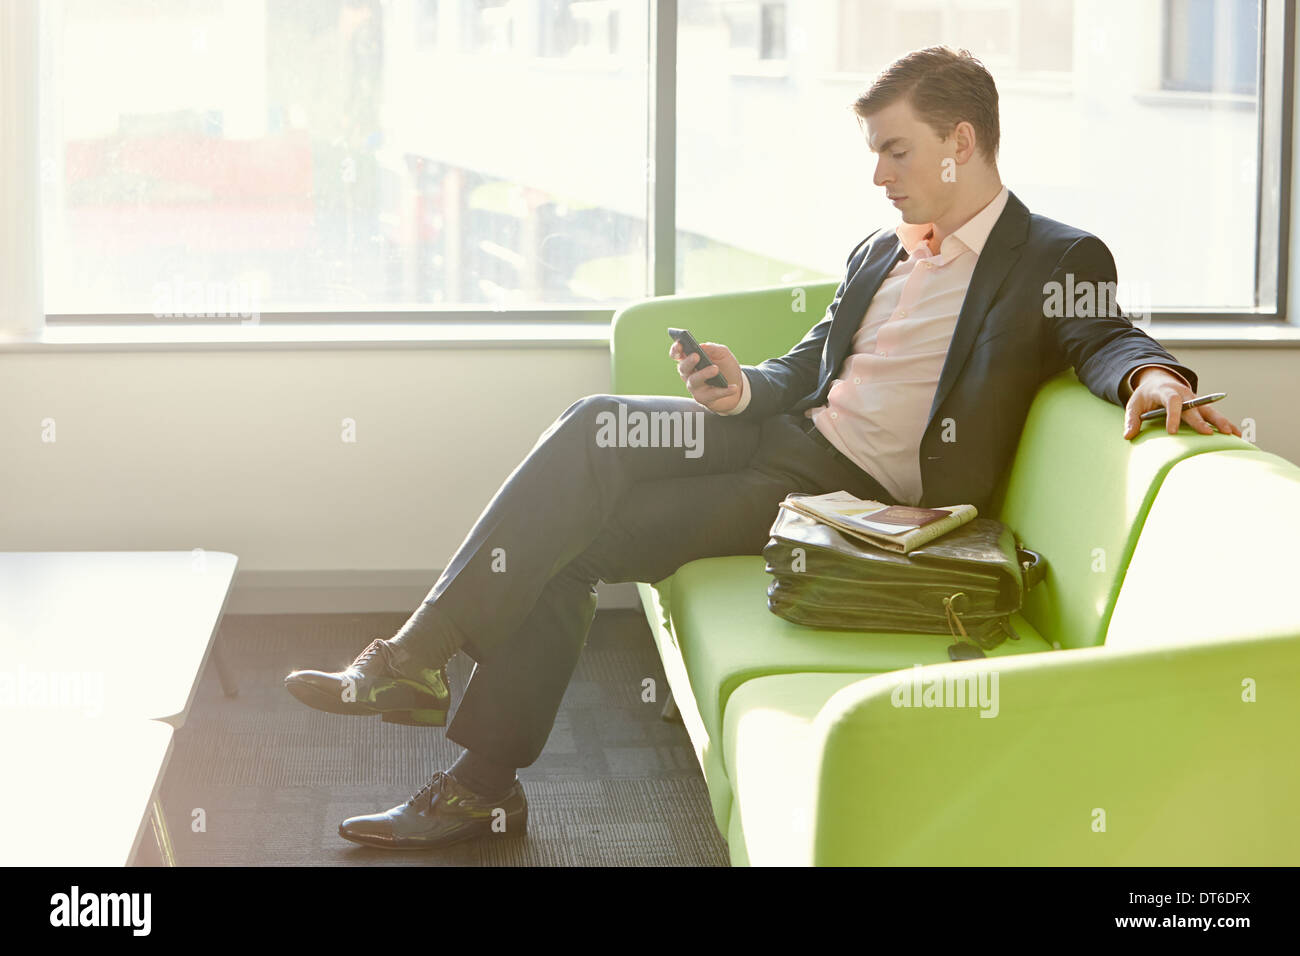 Businessman in departure lounge using cell phone Banque D'Images